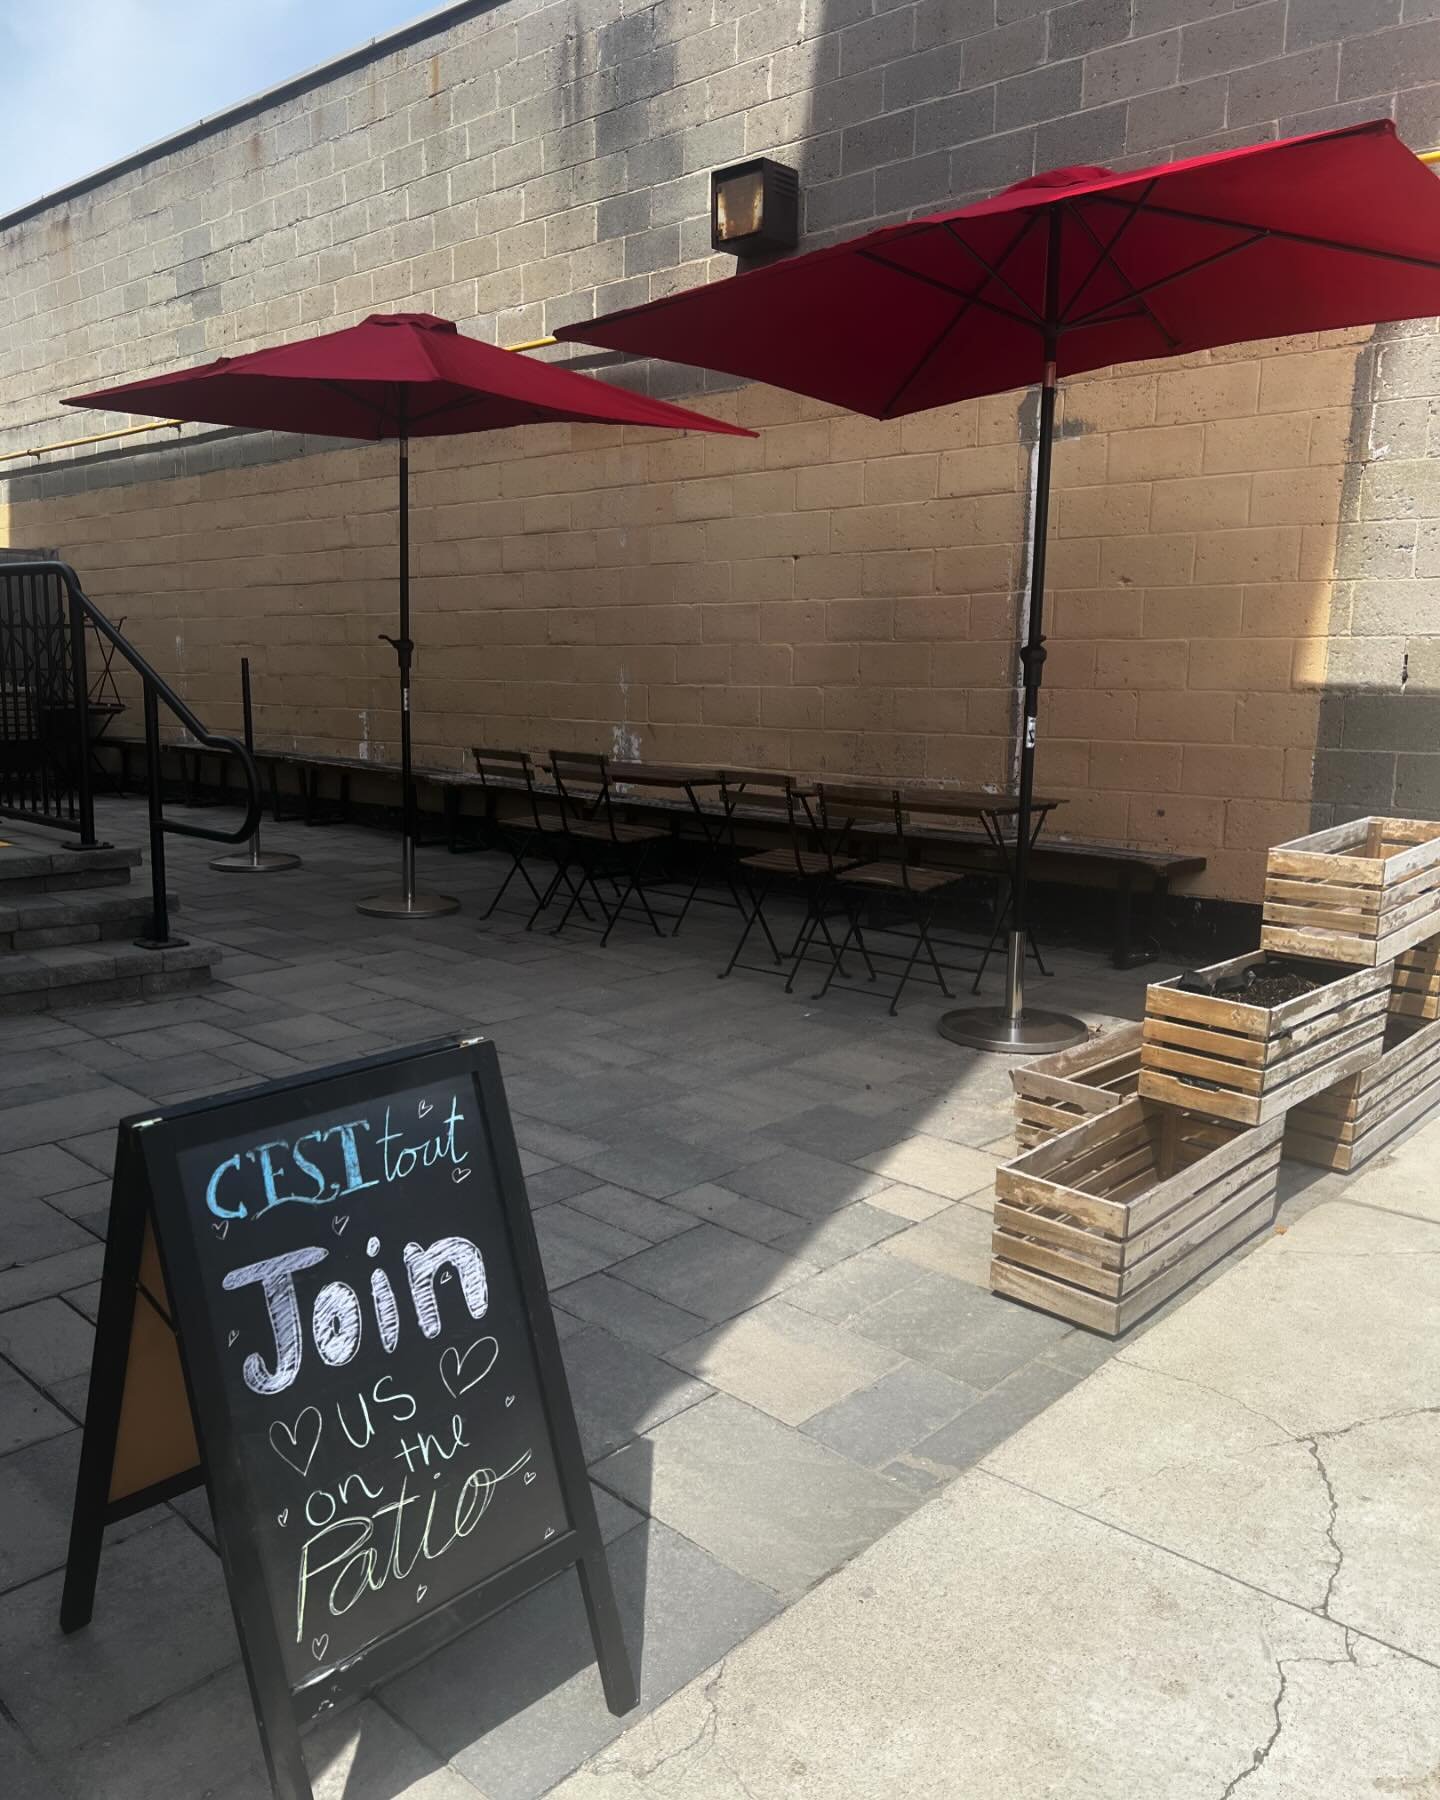 It&rsquo;s a little sparse right now (we&rsquo;re playing it safe before putting any plants out!) but seating on the patio is available! 

Pop in to let us know you&rsquo;re here and one of our servers will be out to take care of you!